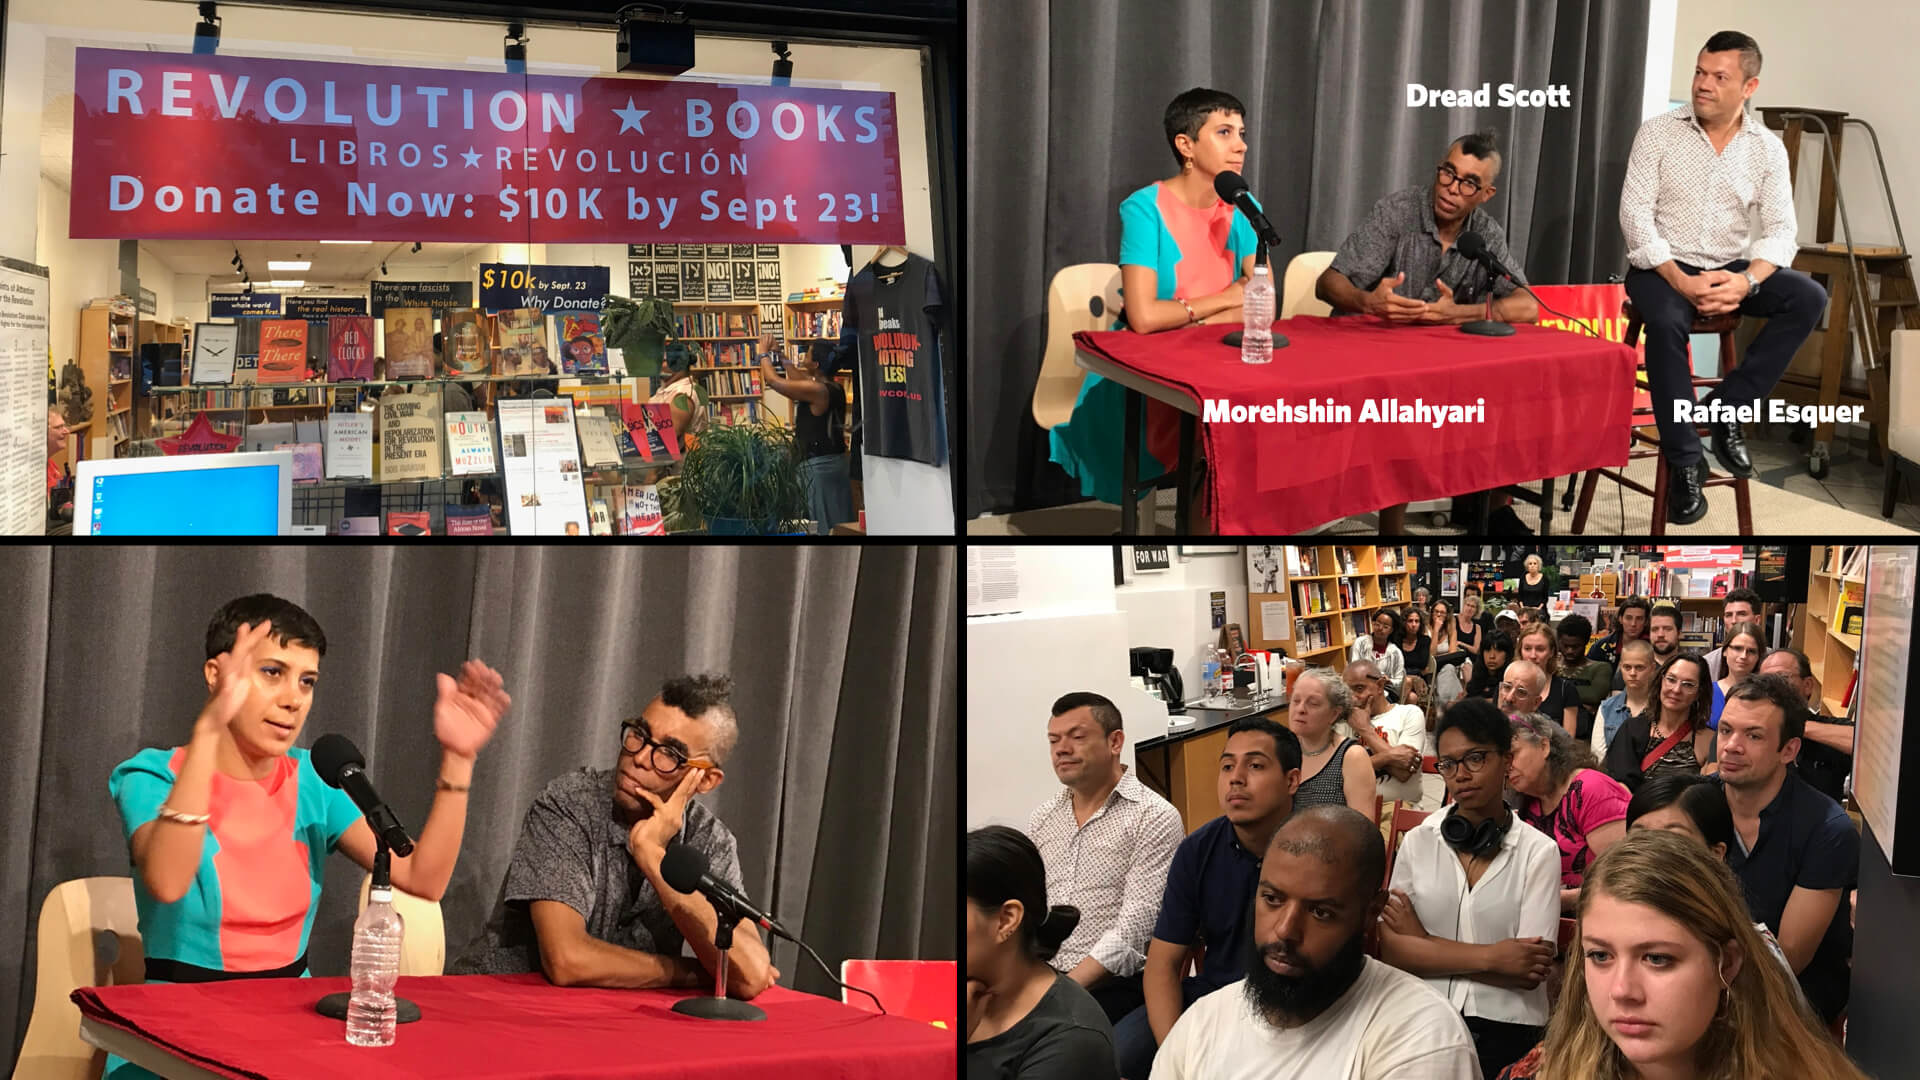 four images featuring a dialog, storefront of Revolution Books and an audience